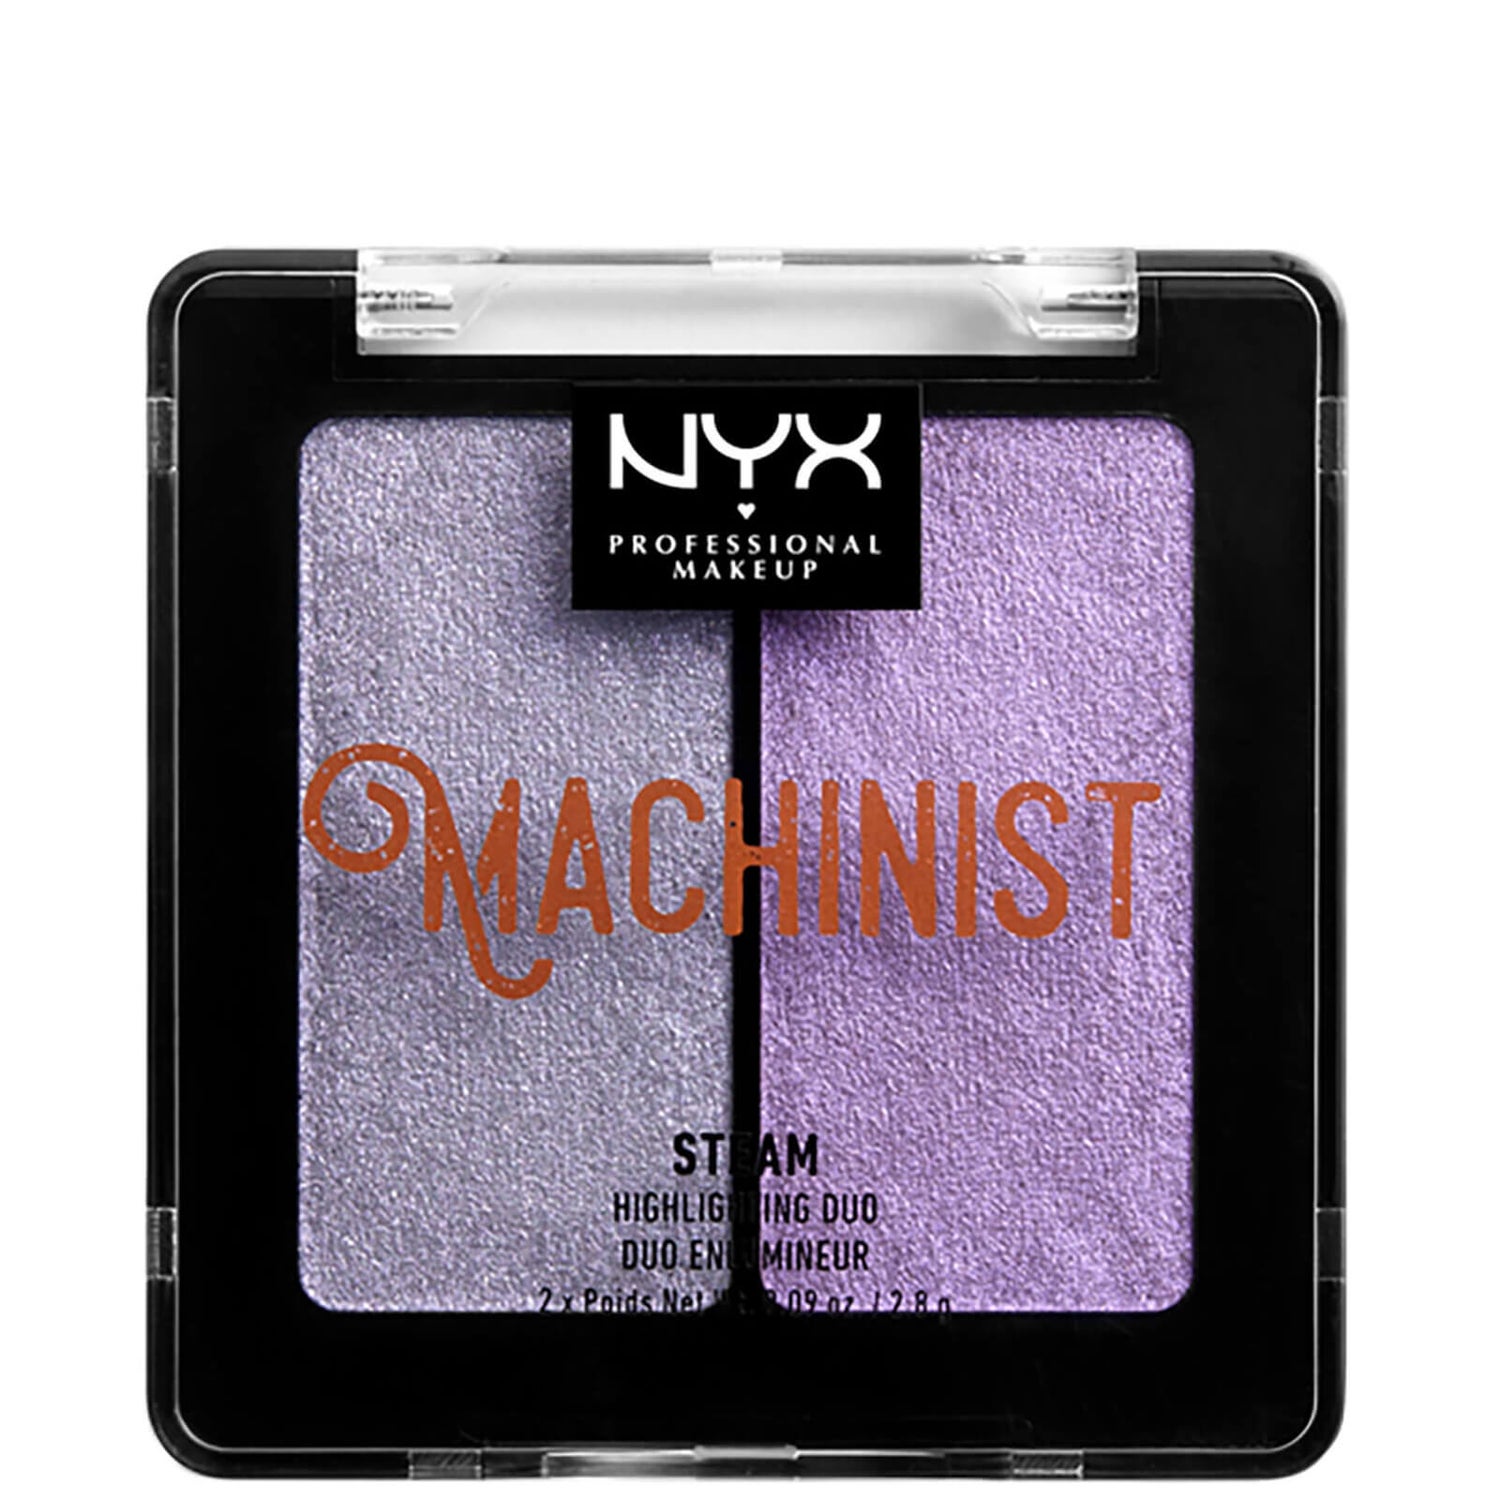 NYX Professional Makeup Machinist Highlighter Duo Kit - Steam